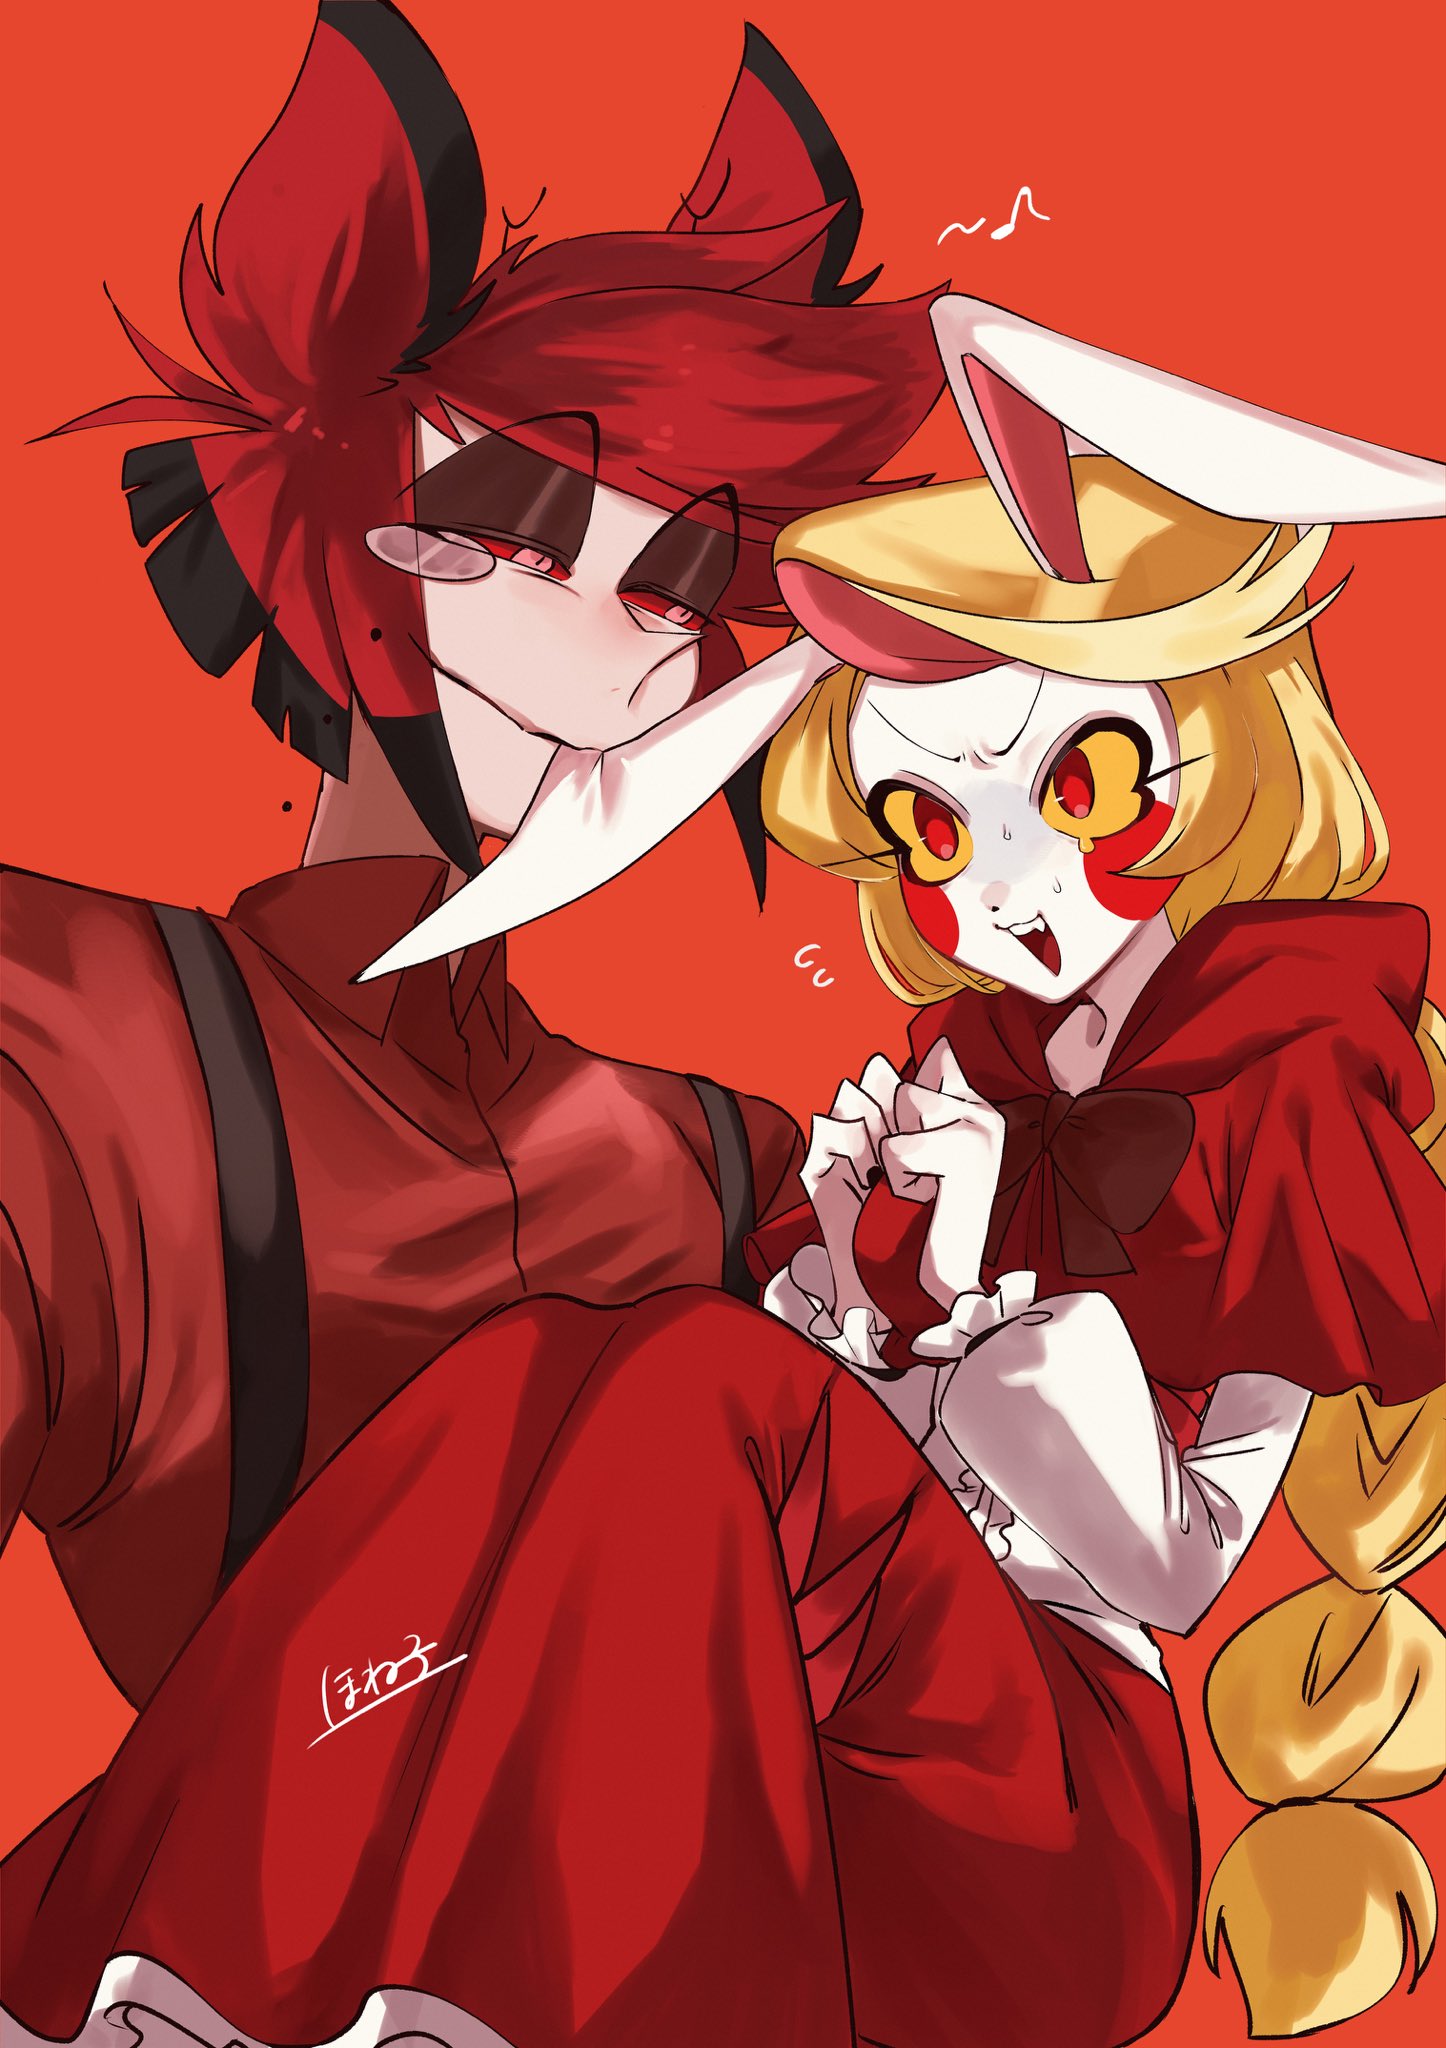 1boy 1girl alastor_(hazbin_hotel) alternate_costume alternate_hairstyle animal_ears black_hair blonde_hair carrying charlie_morningstar colored_sclera commentary_request formal hazbin_hotel highres honeko_06 long_hair multicolored_hair nibbling ponytail princess_carry rabbit_ears red_background red_eyes red_sclera redhead short_hair simple_background suit yellow_sclera